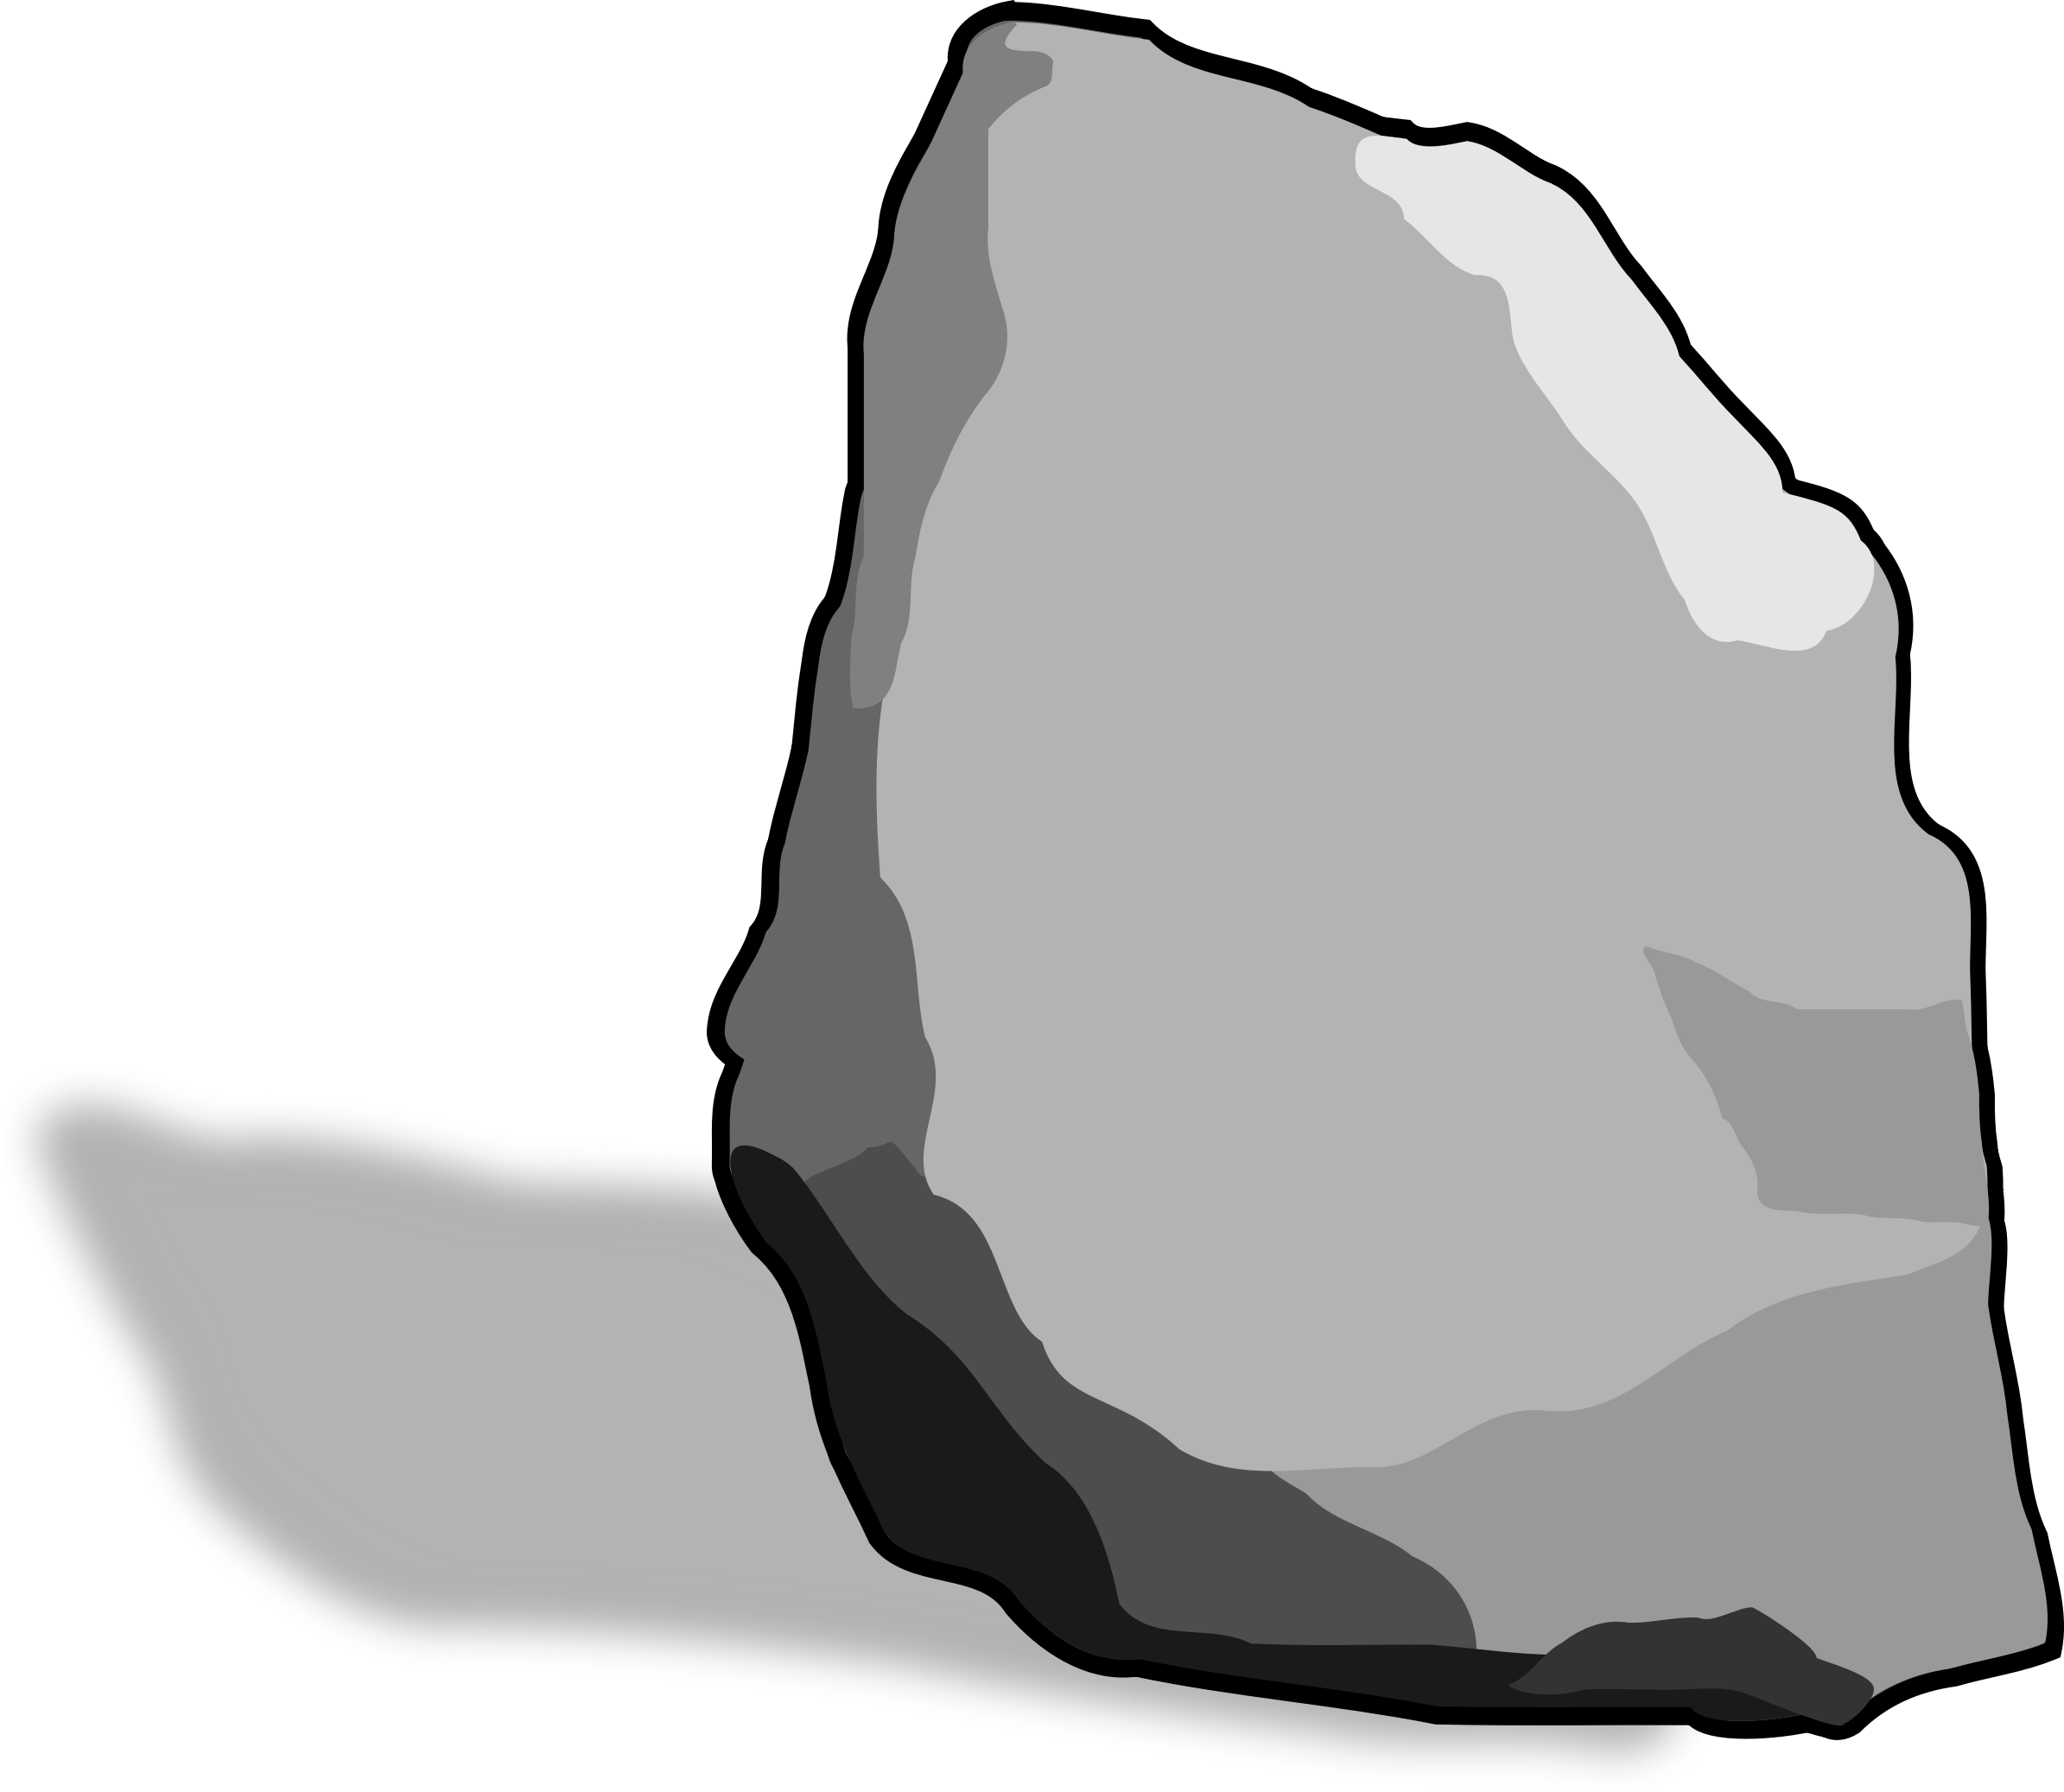  collection of high. Clipart rock hard stone